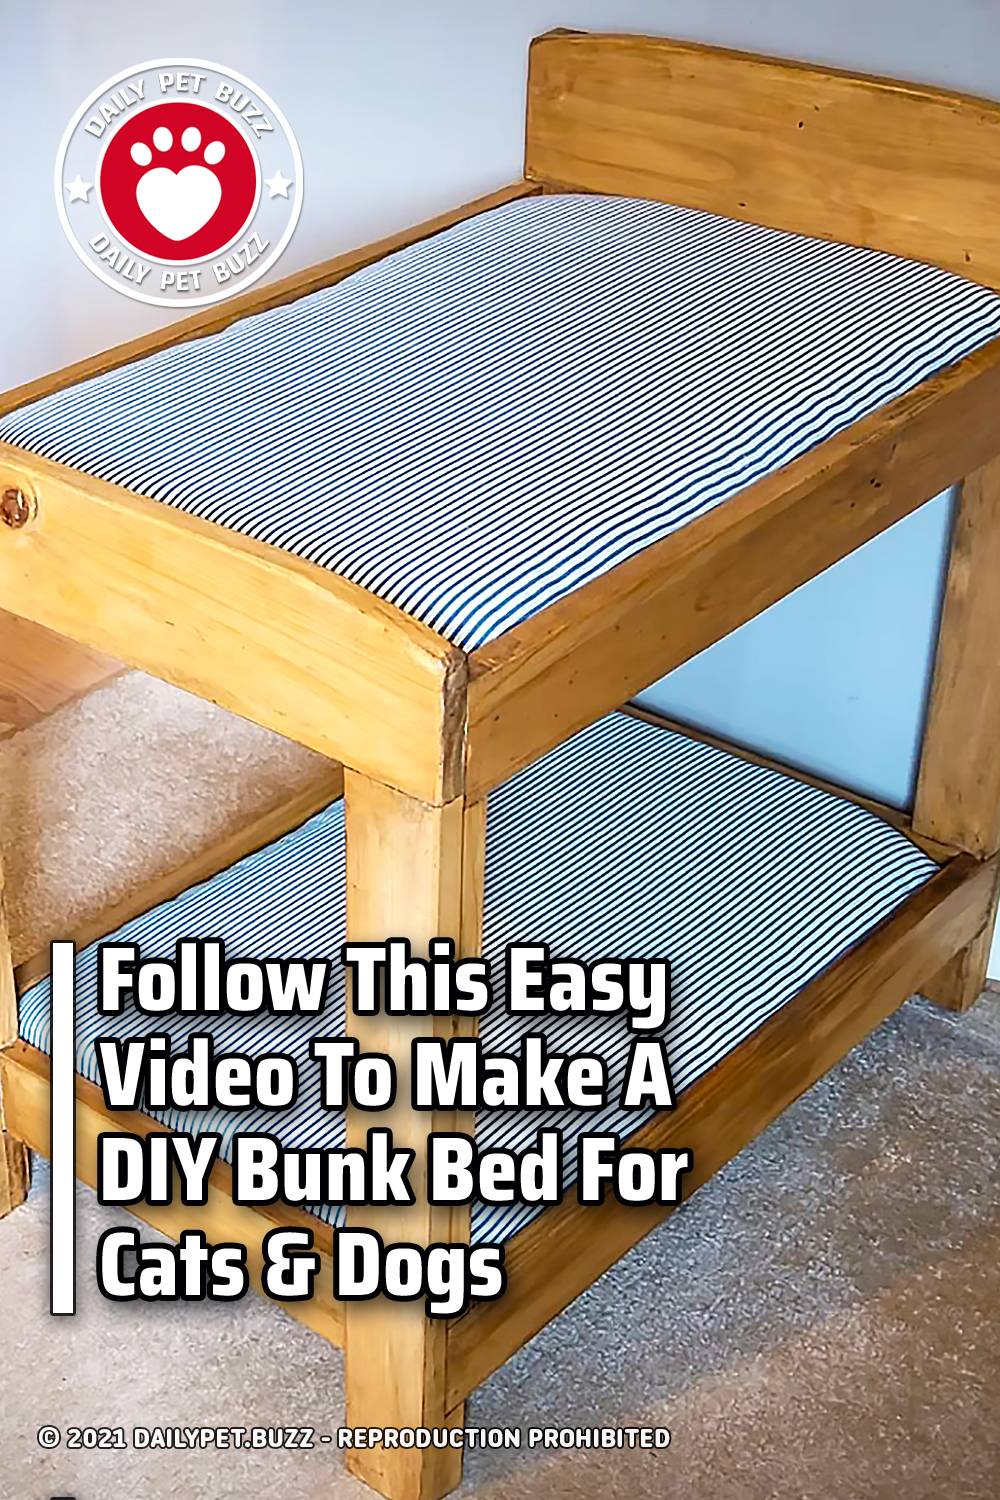 Follow This Easy Video To Make A DIY Bunk Bed For Cats & Dogs